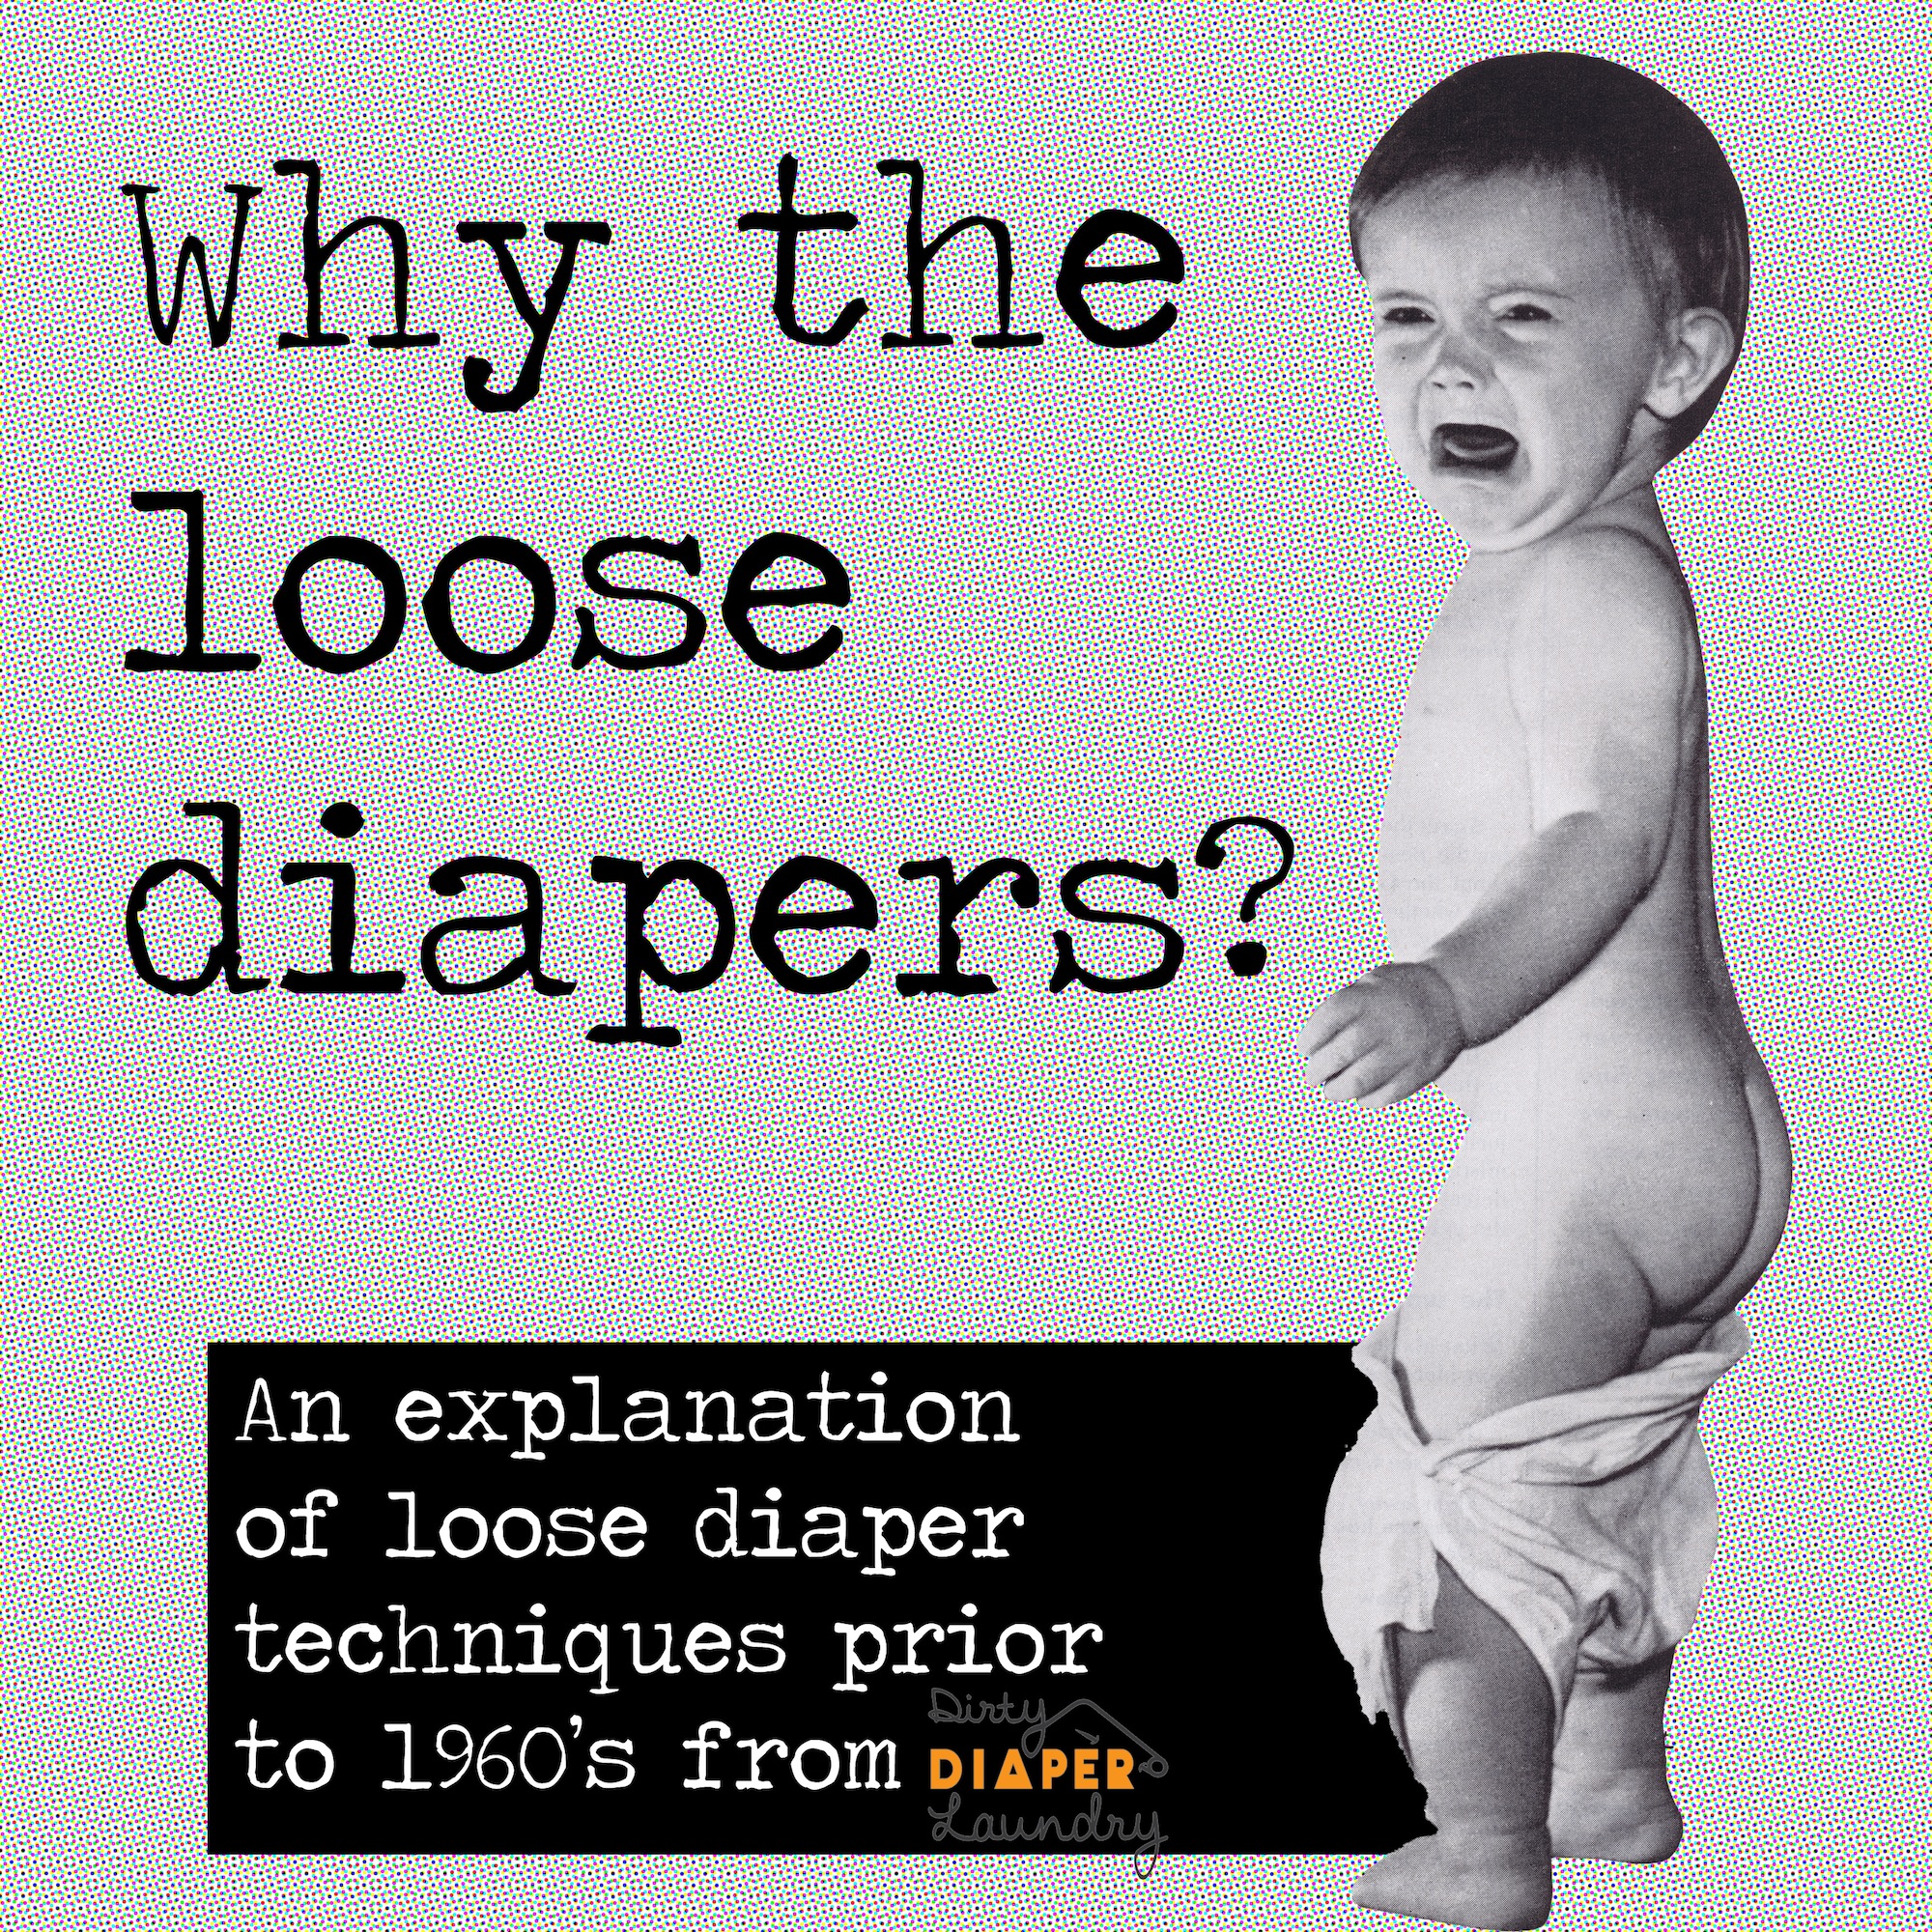 Why the loose diaper? www.dirtydiaperlaundry.com explains why diapers were worn loosely by babies in old photographs.